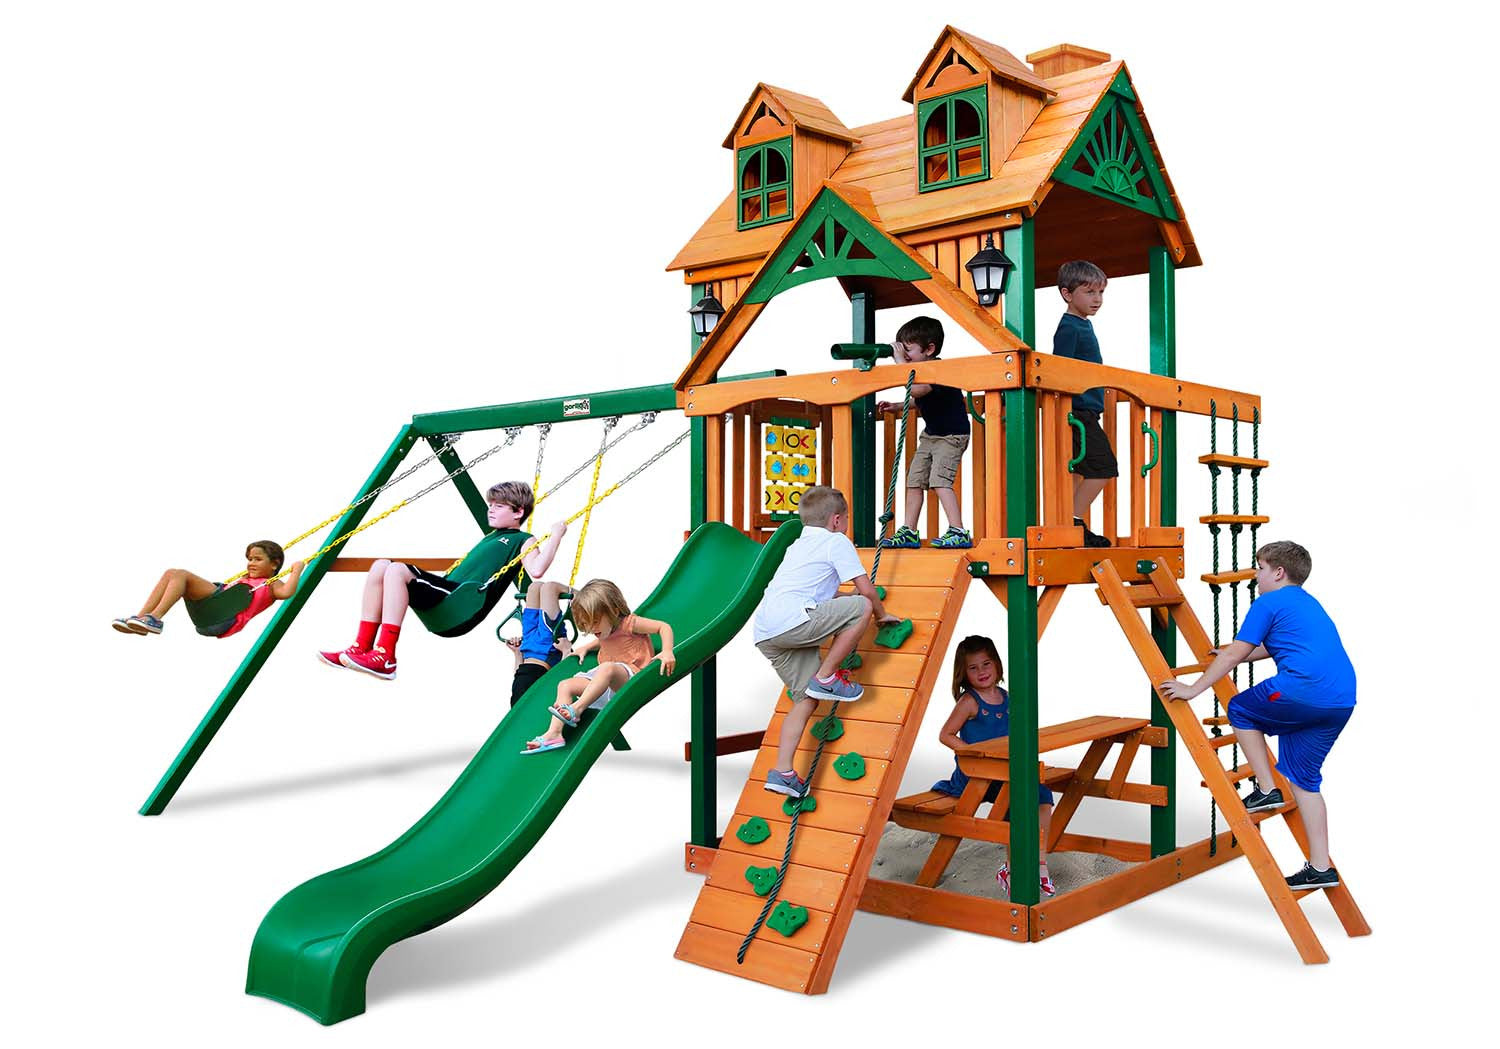 I Just Bought A Wooden Swing Set Over the Internet - Now What?